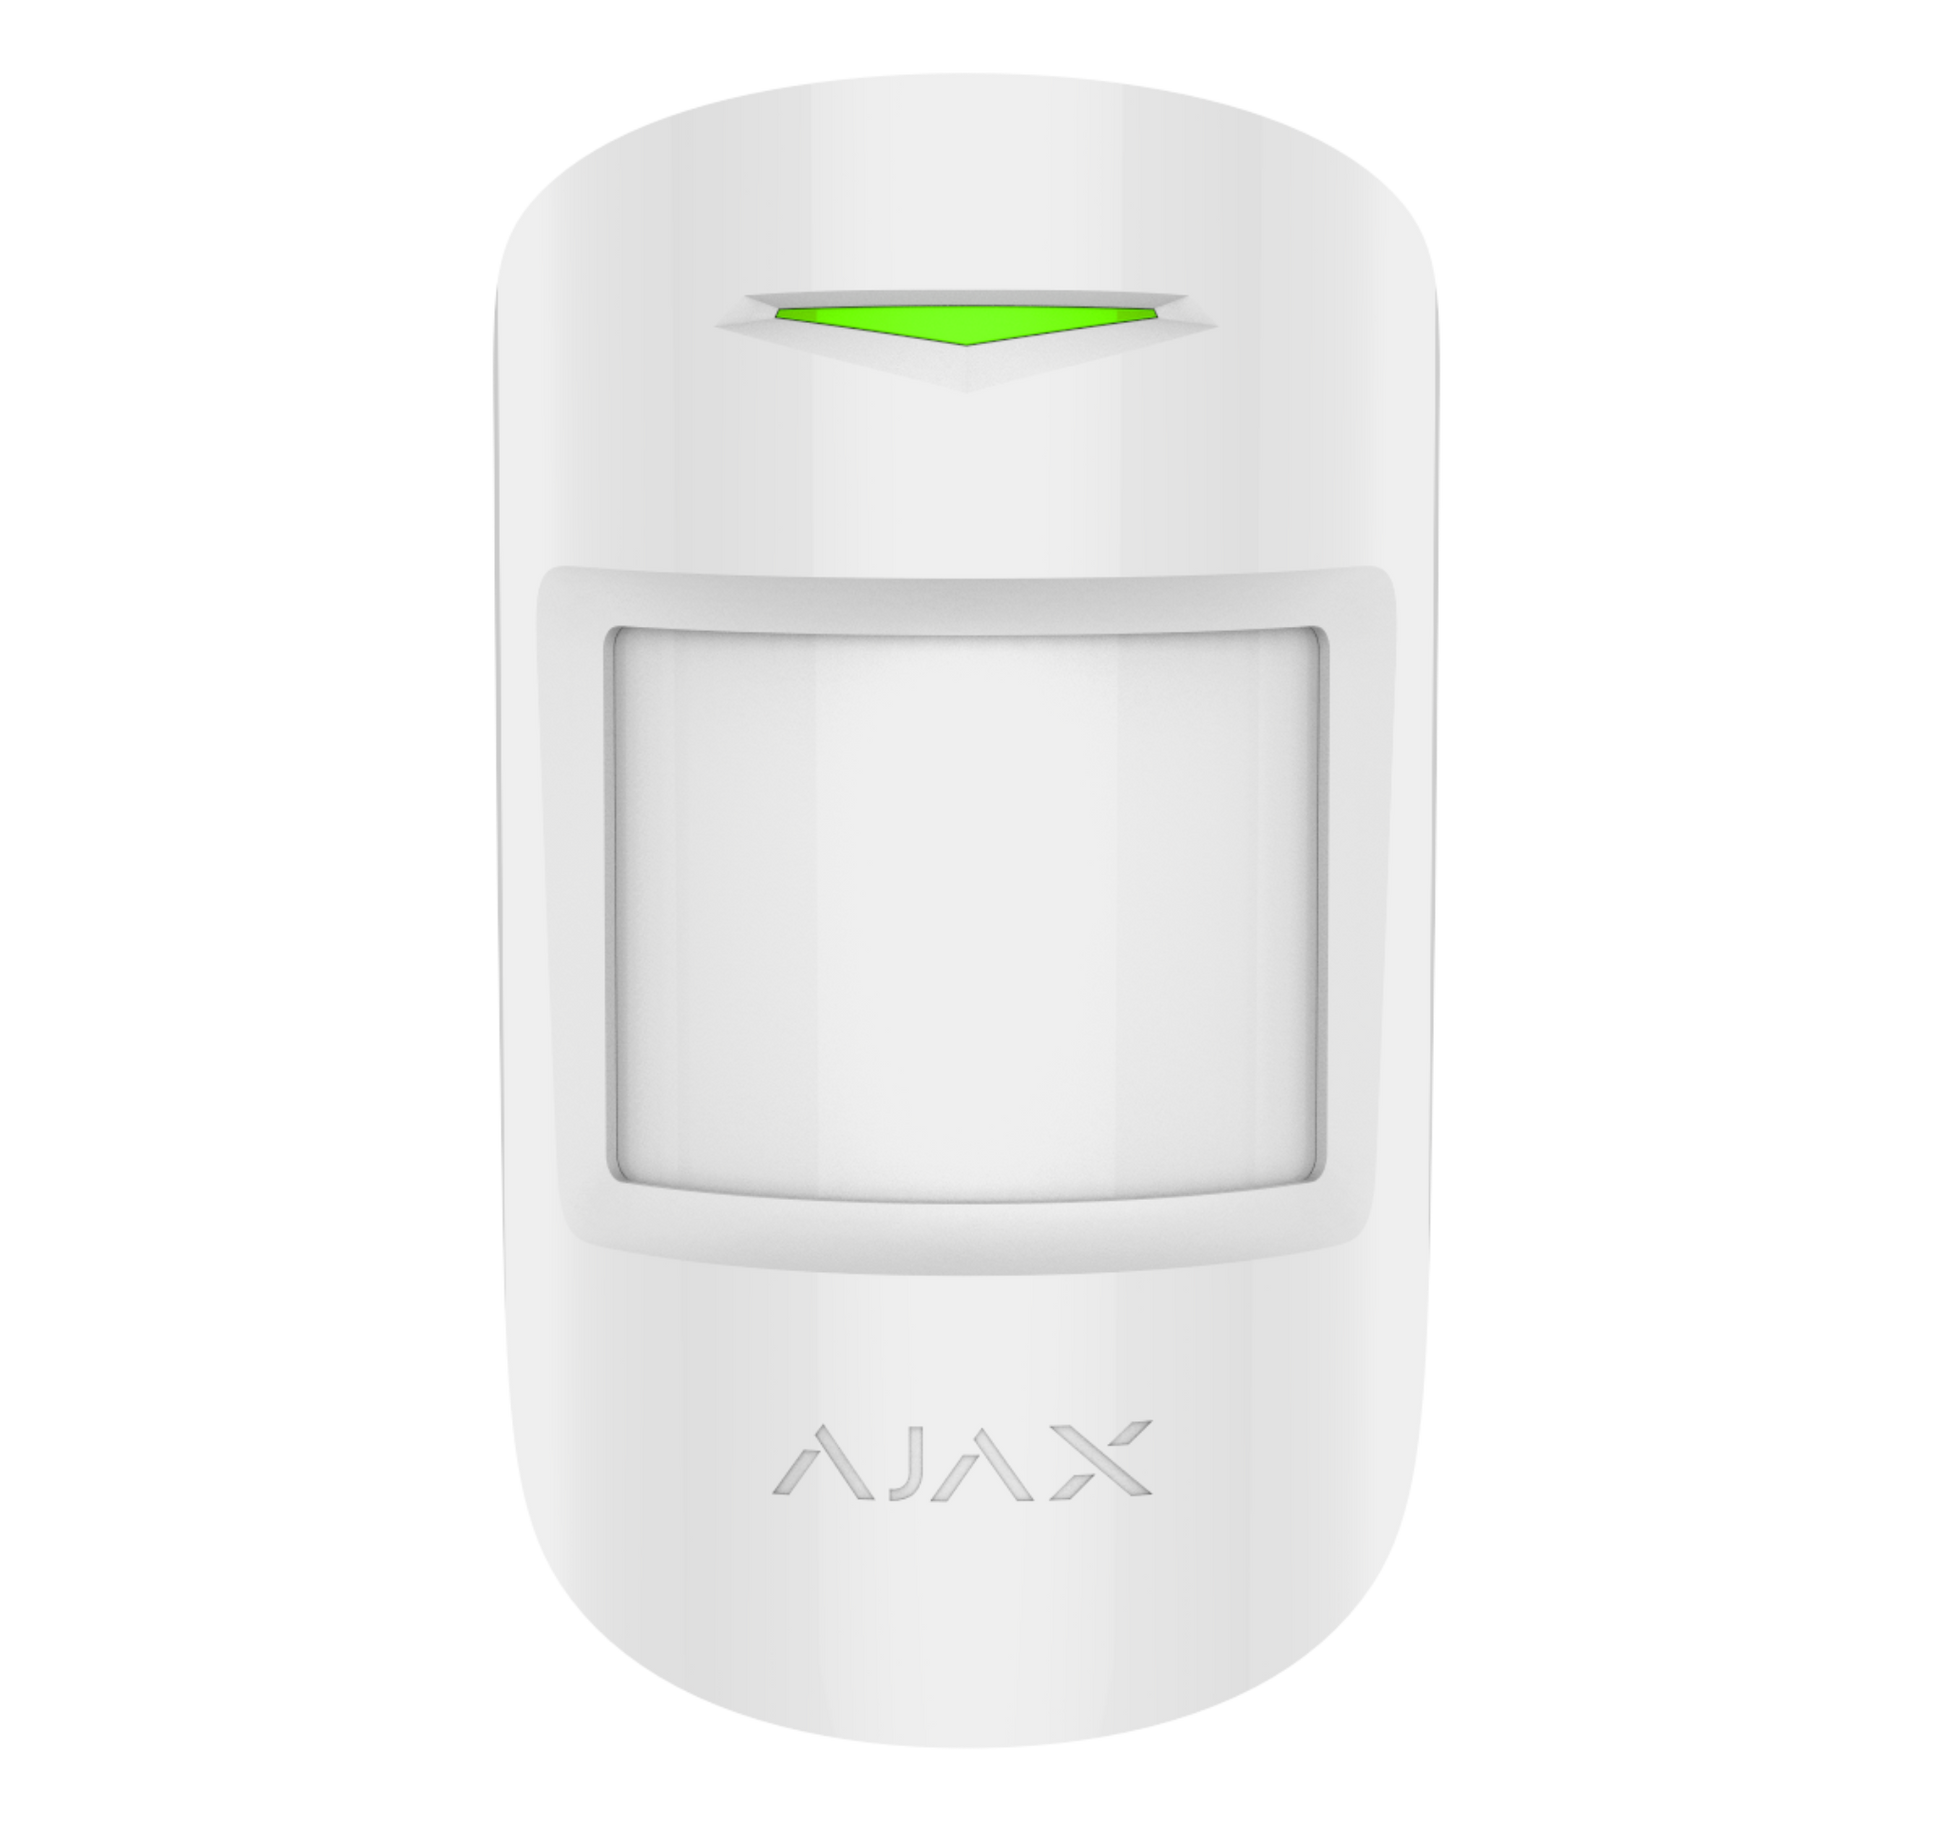 White Ajax MotionProtect plus from Ajax Security Systems sold by, a wireless motion sensor for home and business security. Device is 110 × 65 × 50 mm in size, 96 grams in weight, this is the front view of the device displayed in the image. buy Ajax security products online